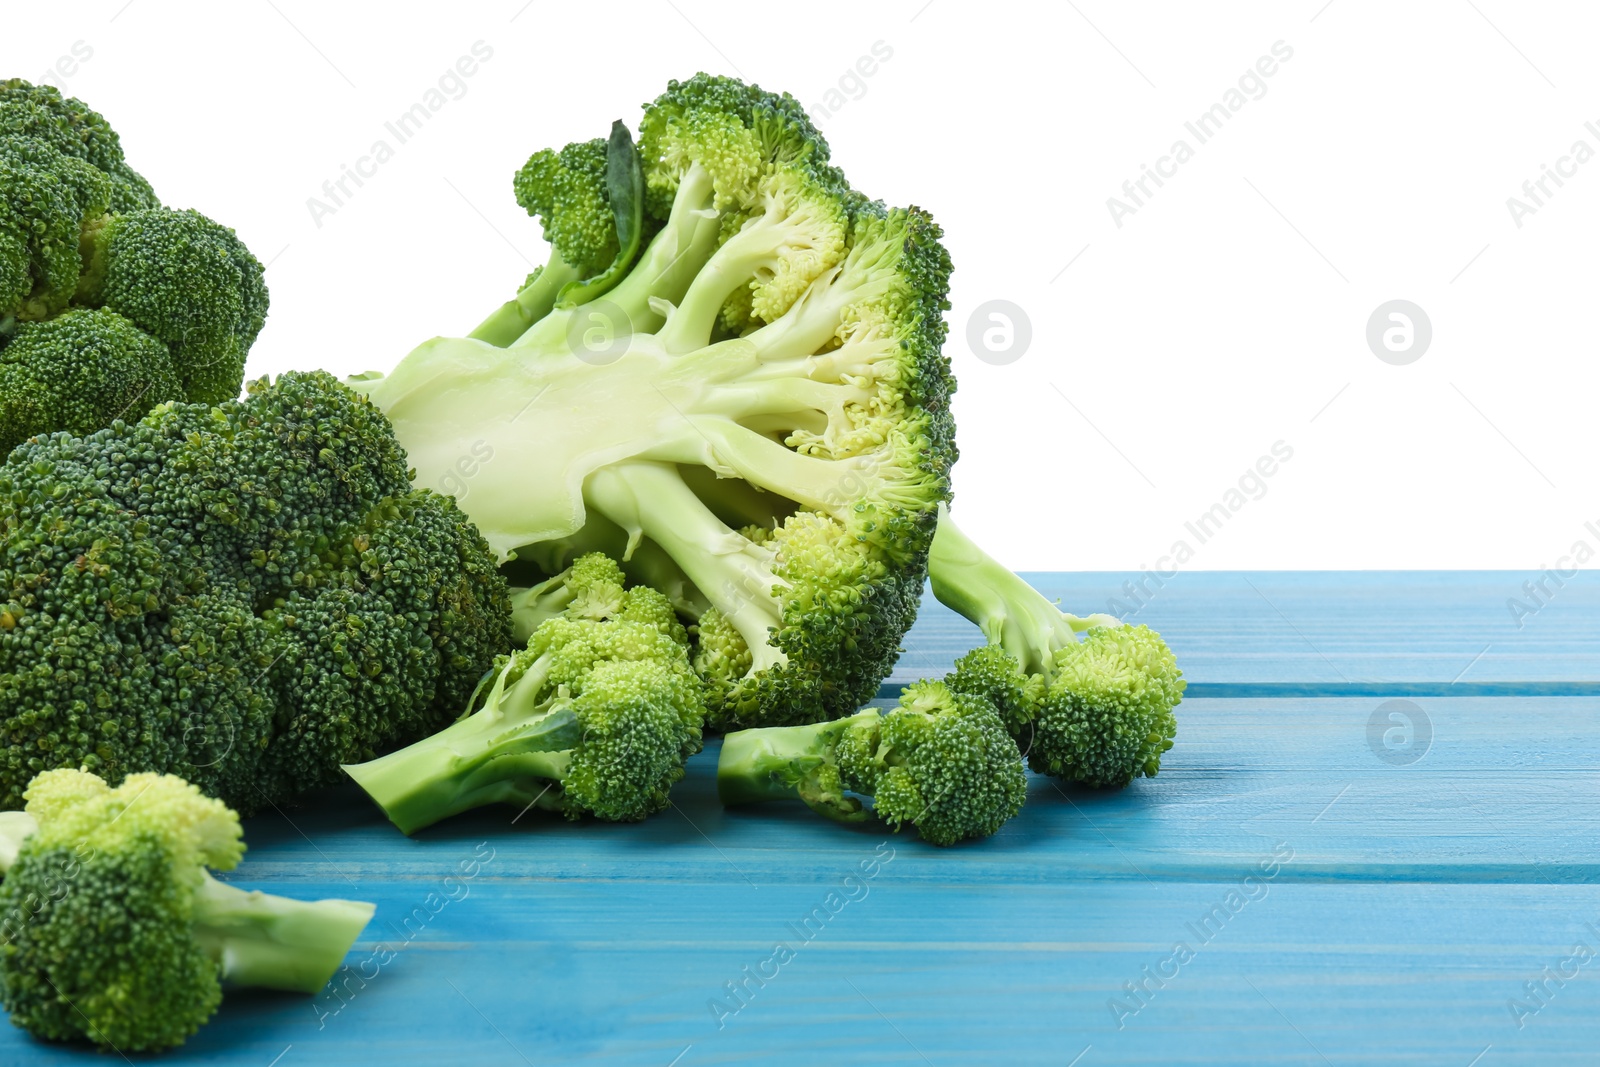 Photo of Fresh broccoli on light blue wooden table against white background. Space for text